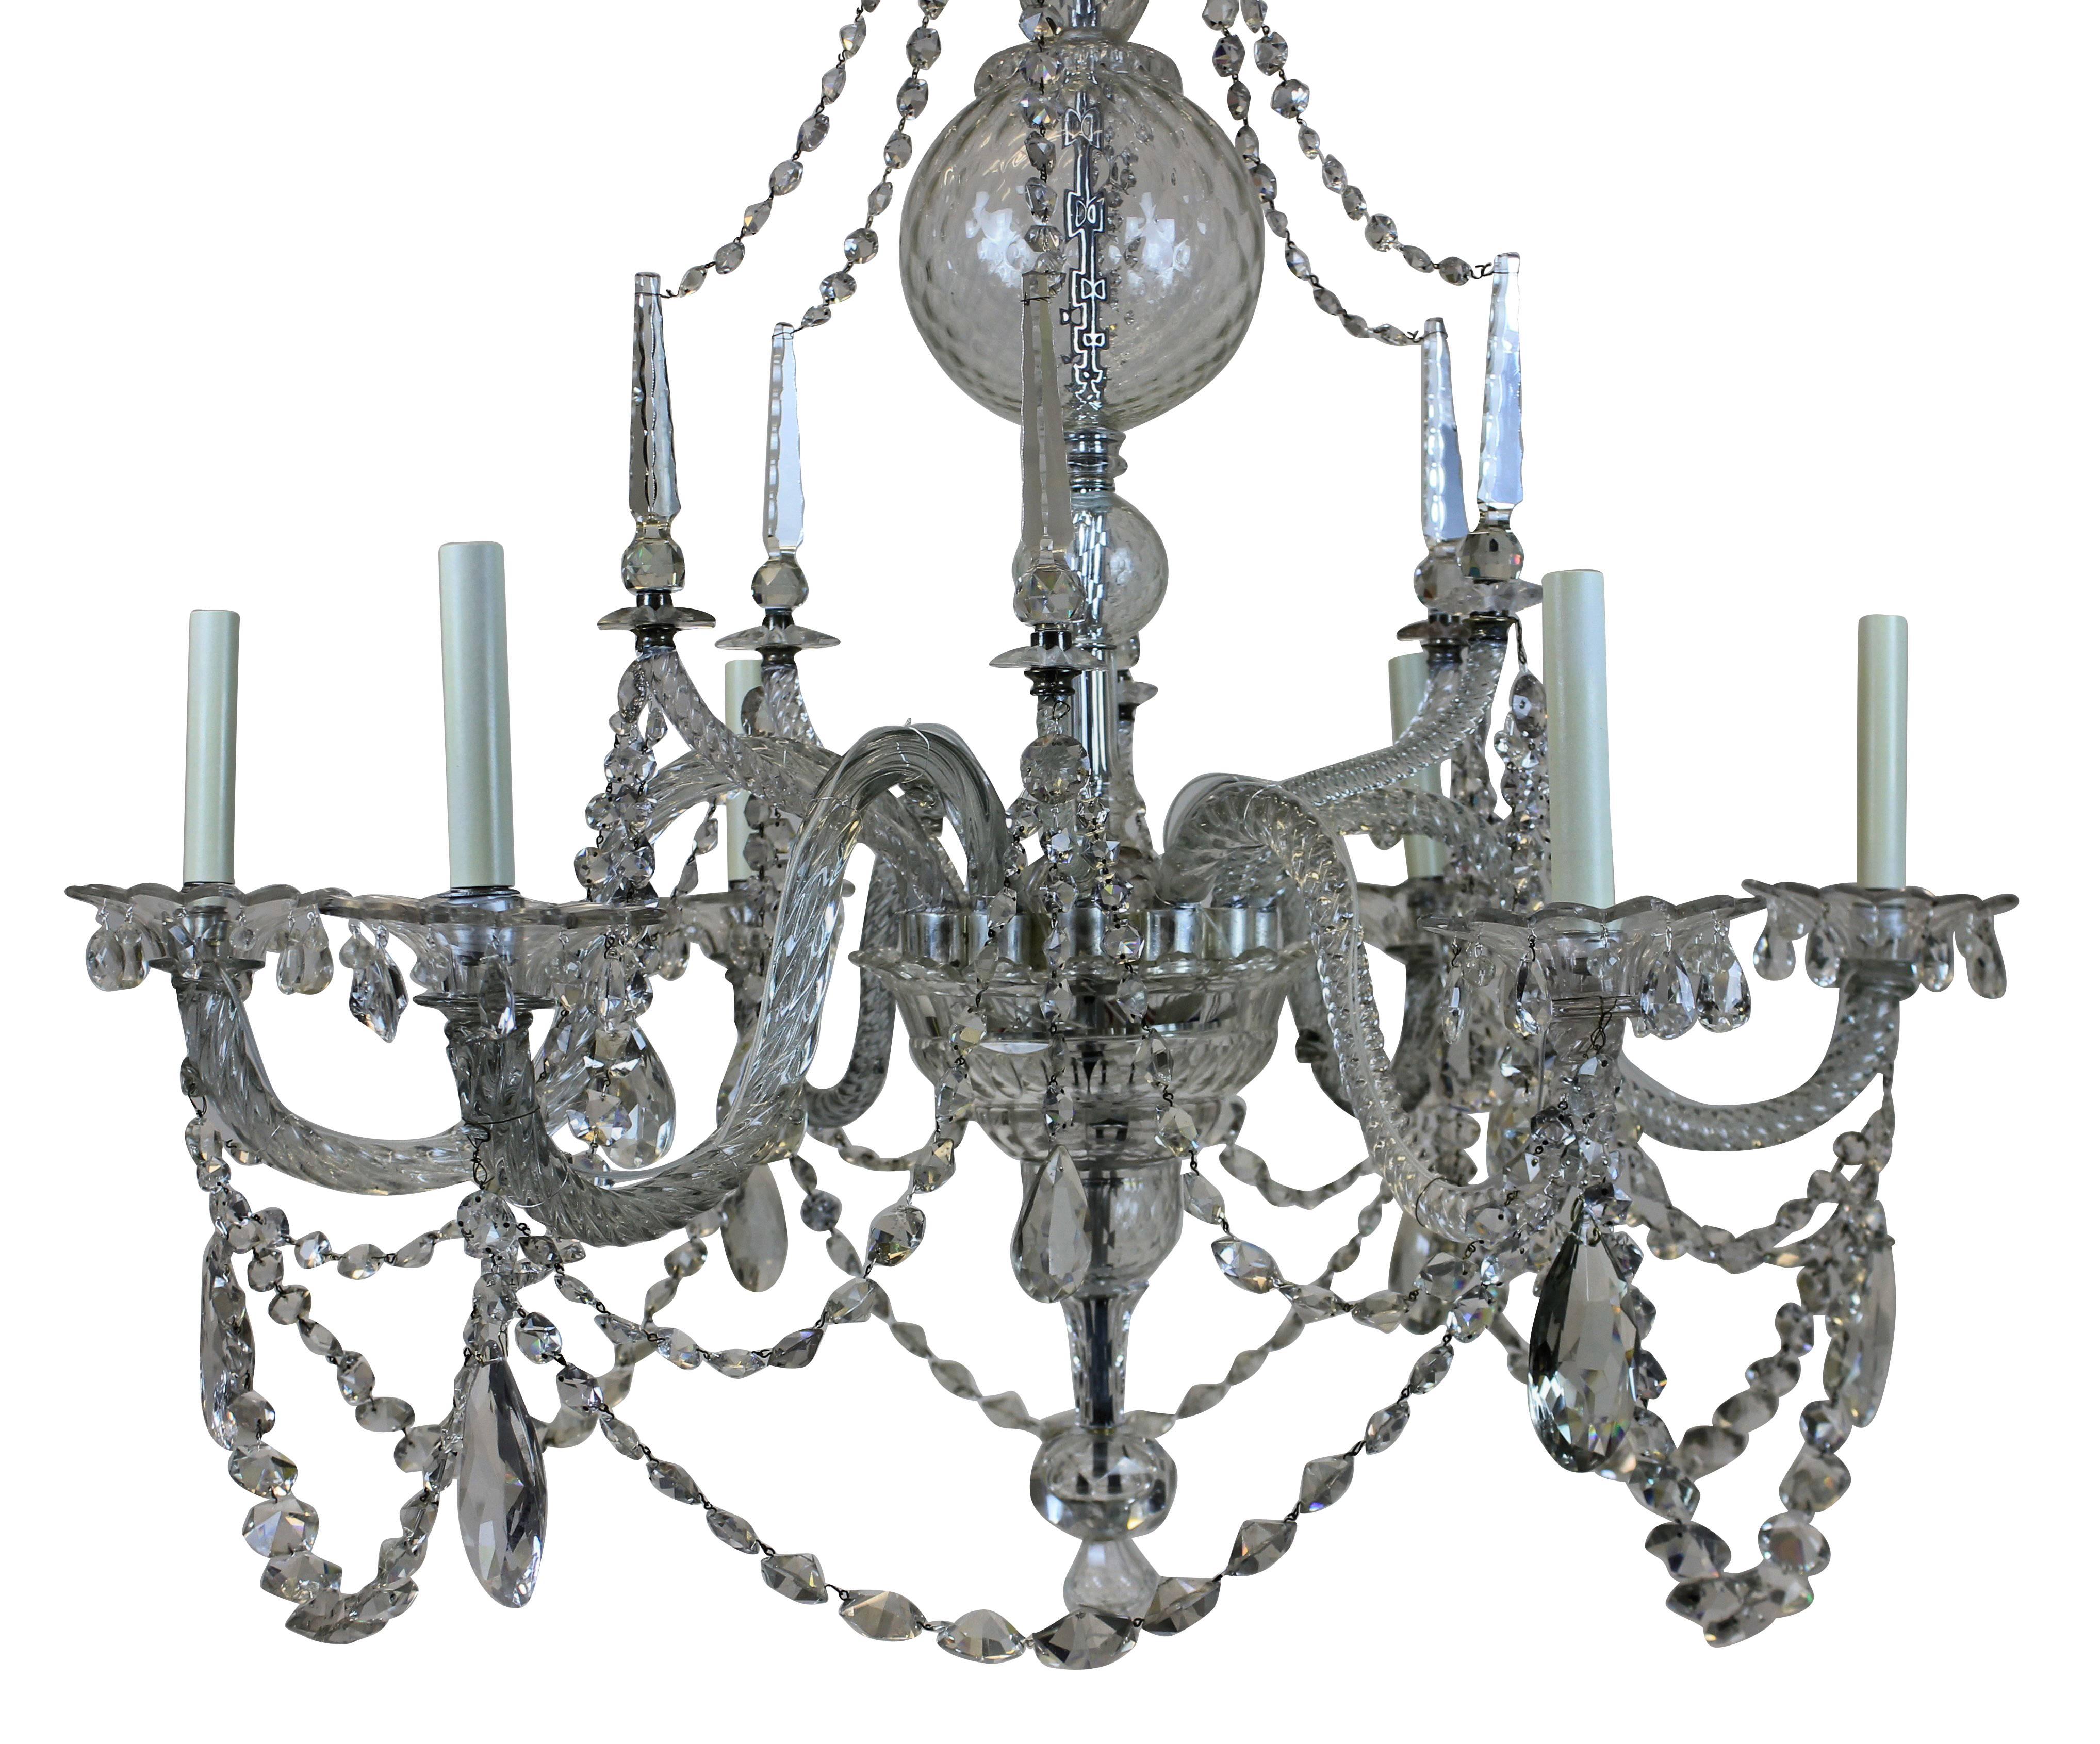 A large English Georgian chandelier of fine quality. Of good proportions, with exceptional cut-glass throughout.
 